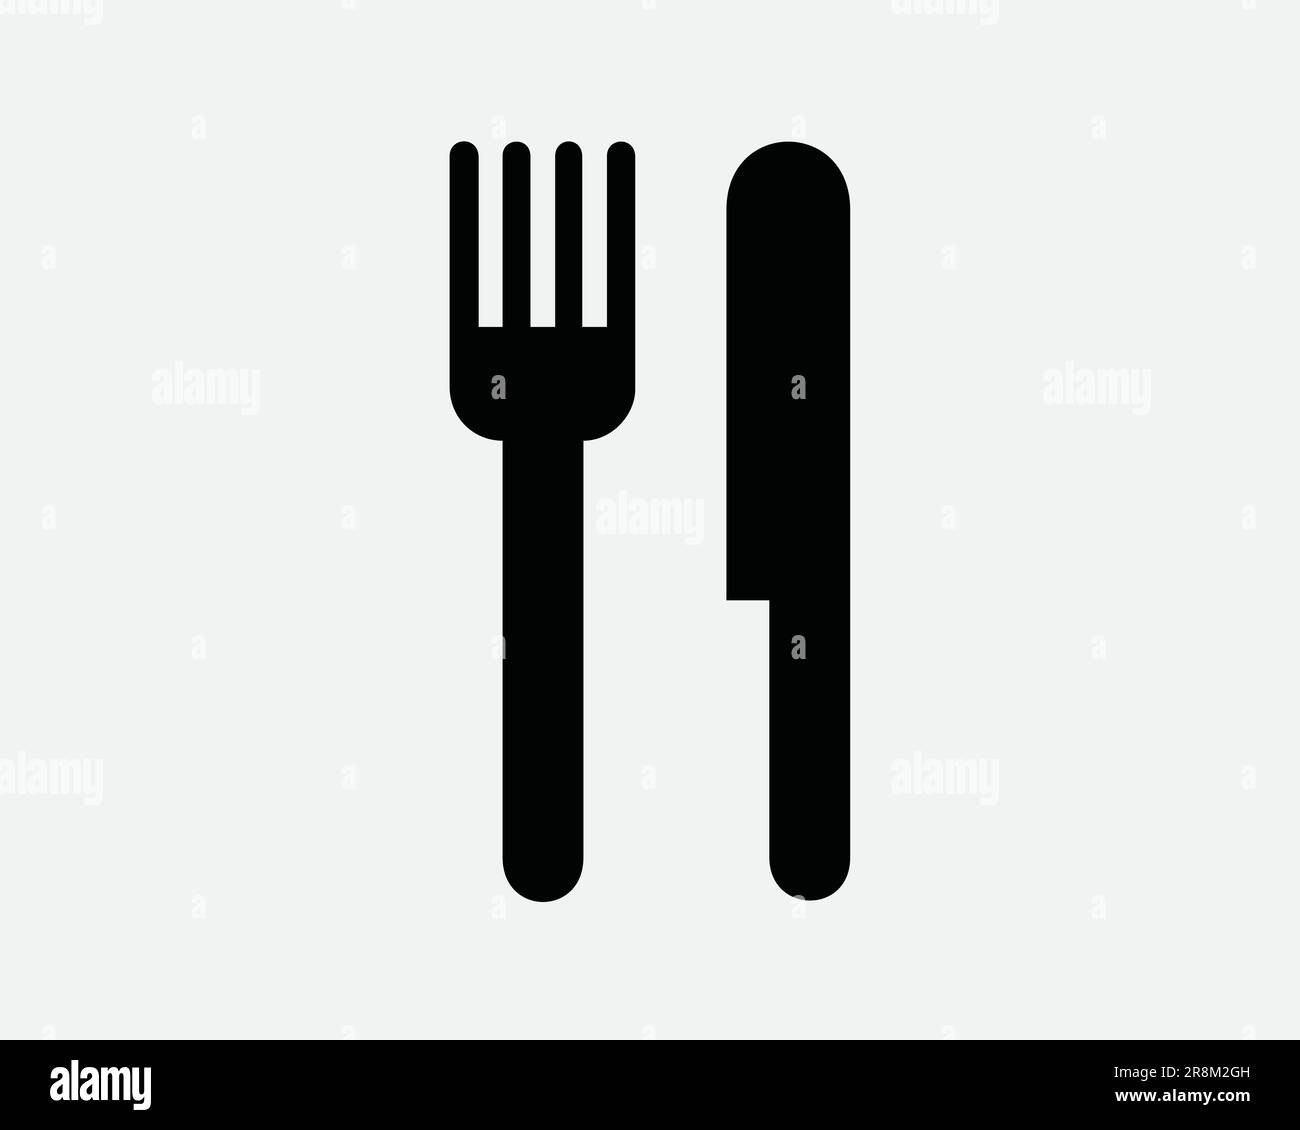 Fork and Knife Icon. Cutlery Kitchen Utensil Dine Dining Meal Eat Silverware. Black White Sign Symbol Illustration Artwork Graphic Clipart EPS Vector Stock Vector